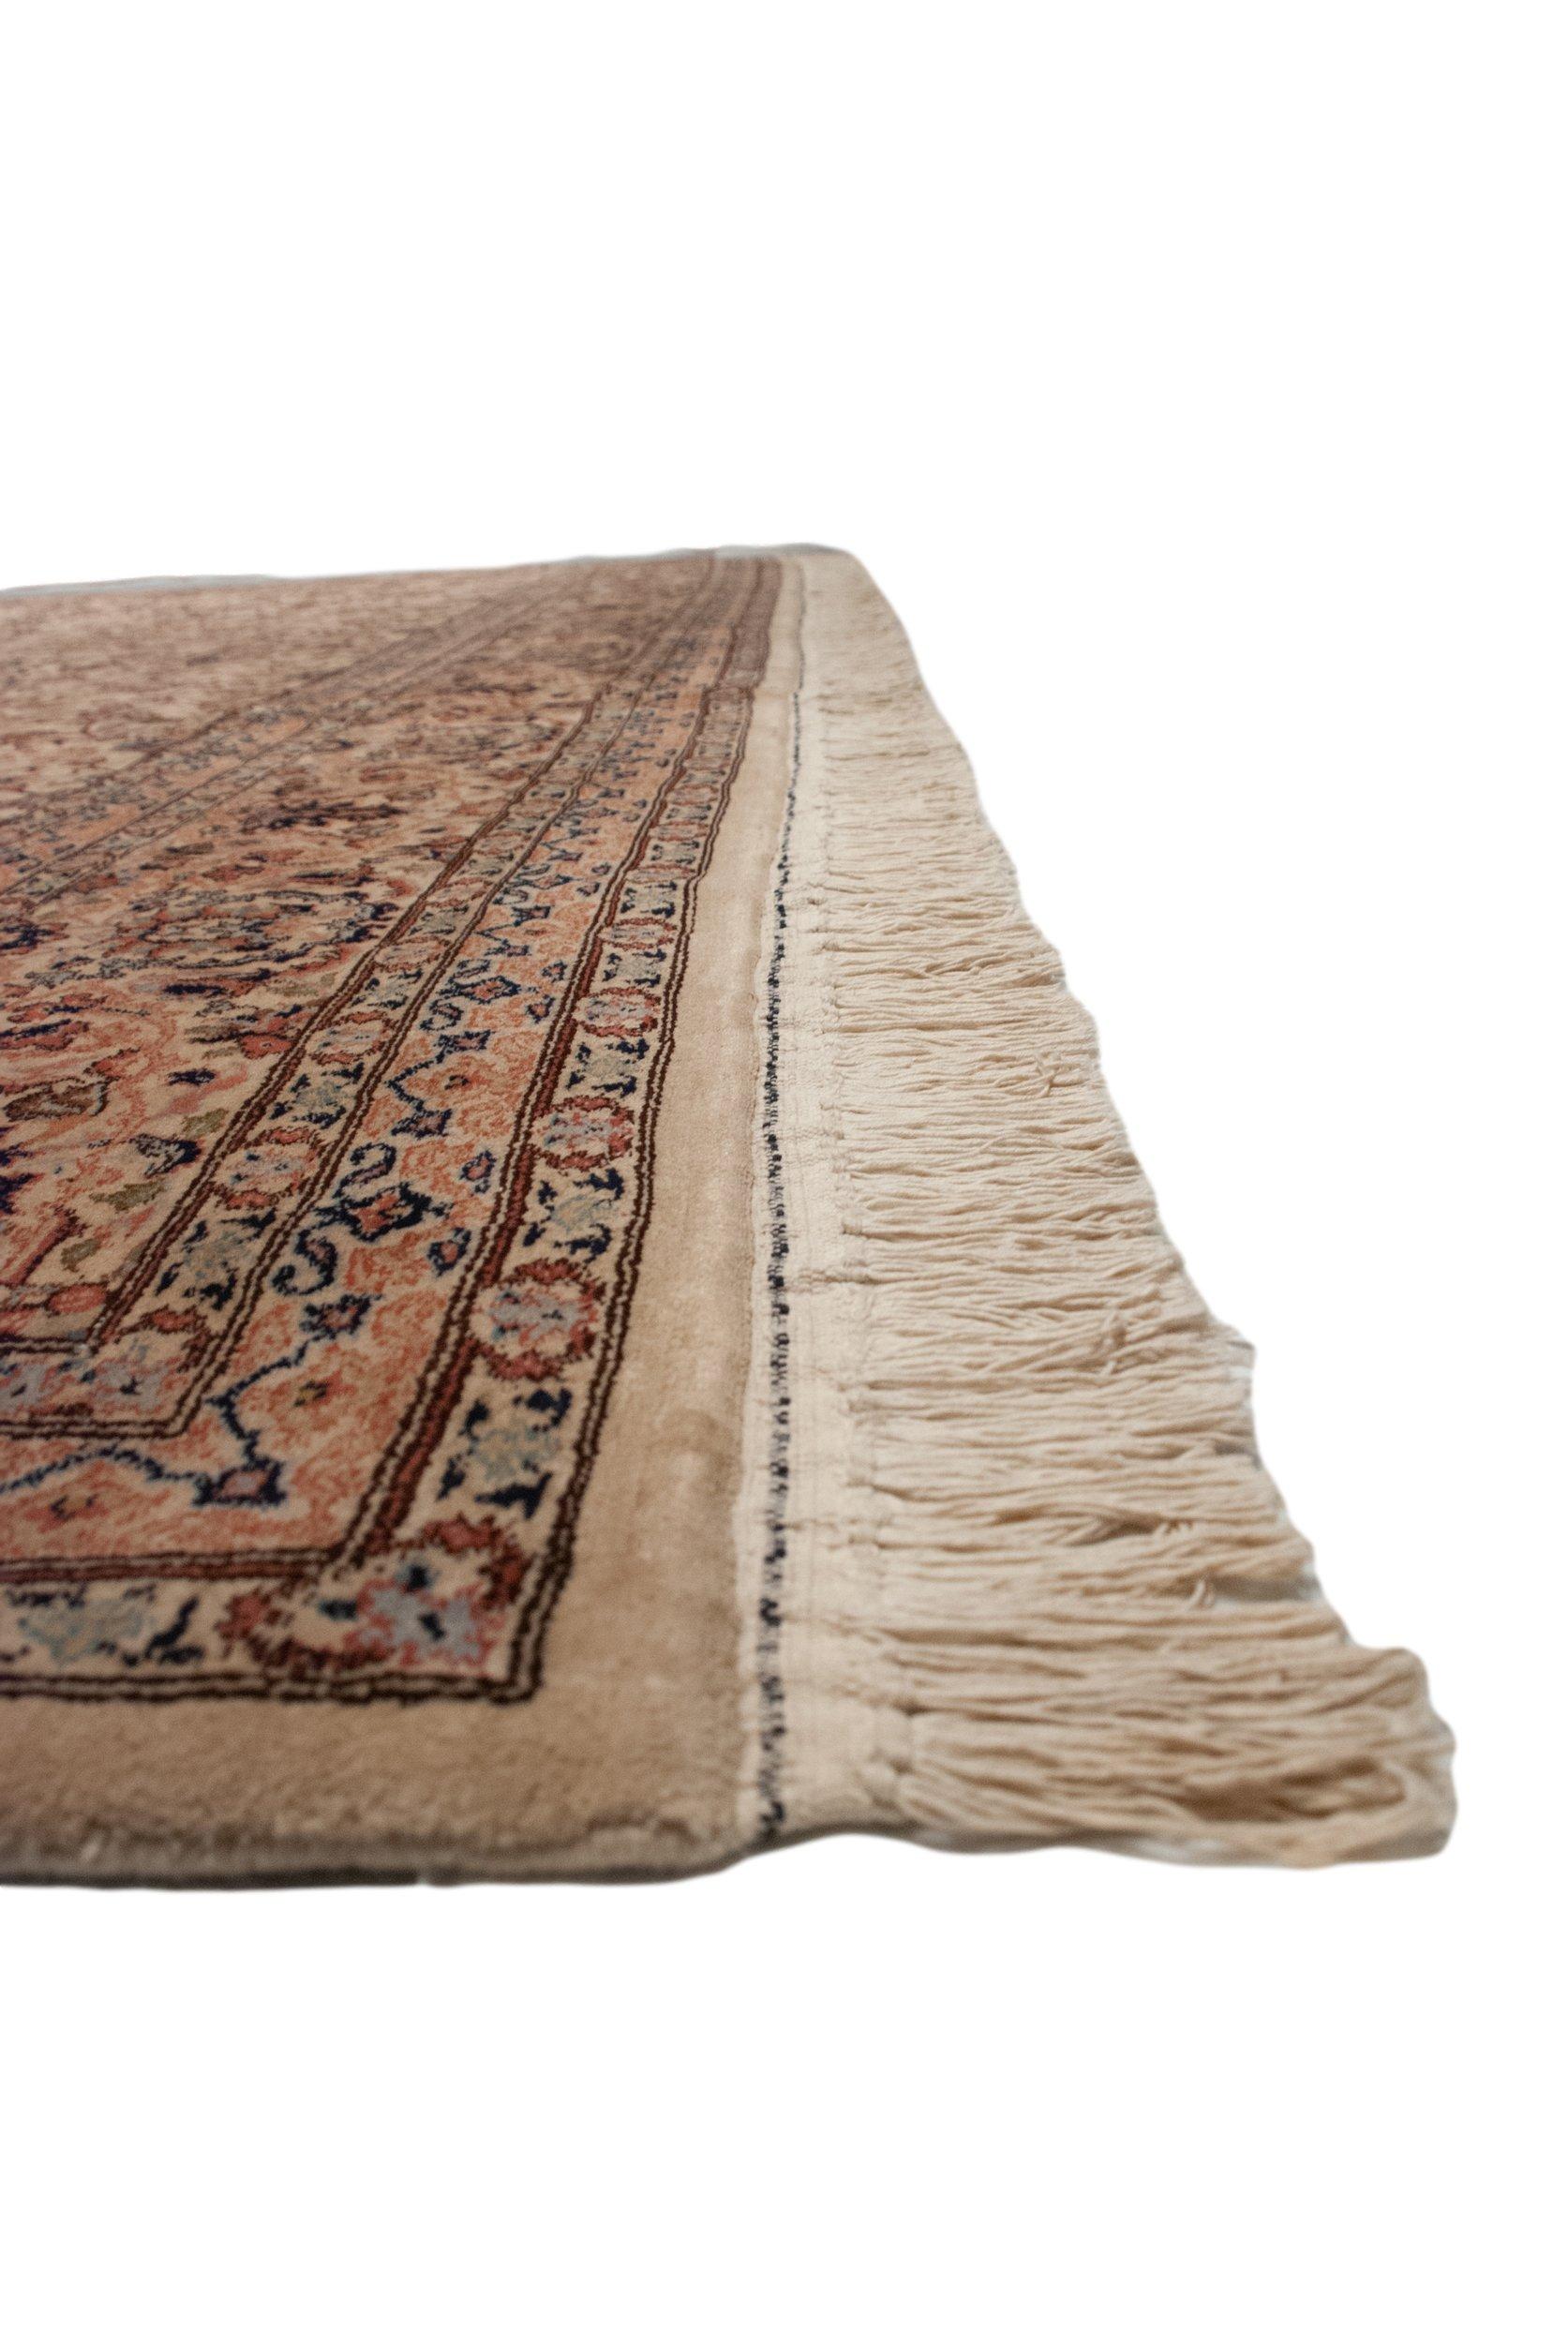 Vintage Pakistani Isfahan Design Carpet In Excellent Condition For Sale In Katonah, NY